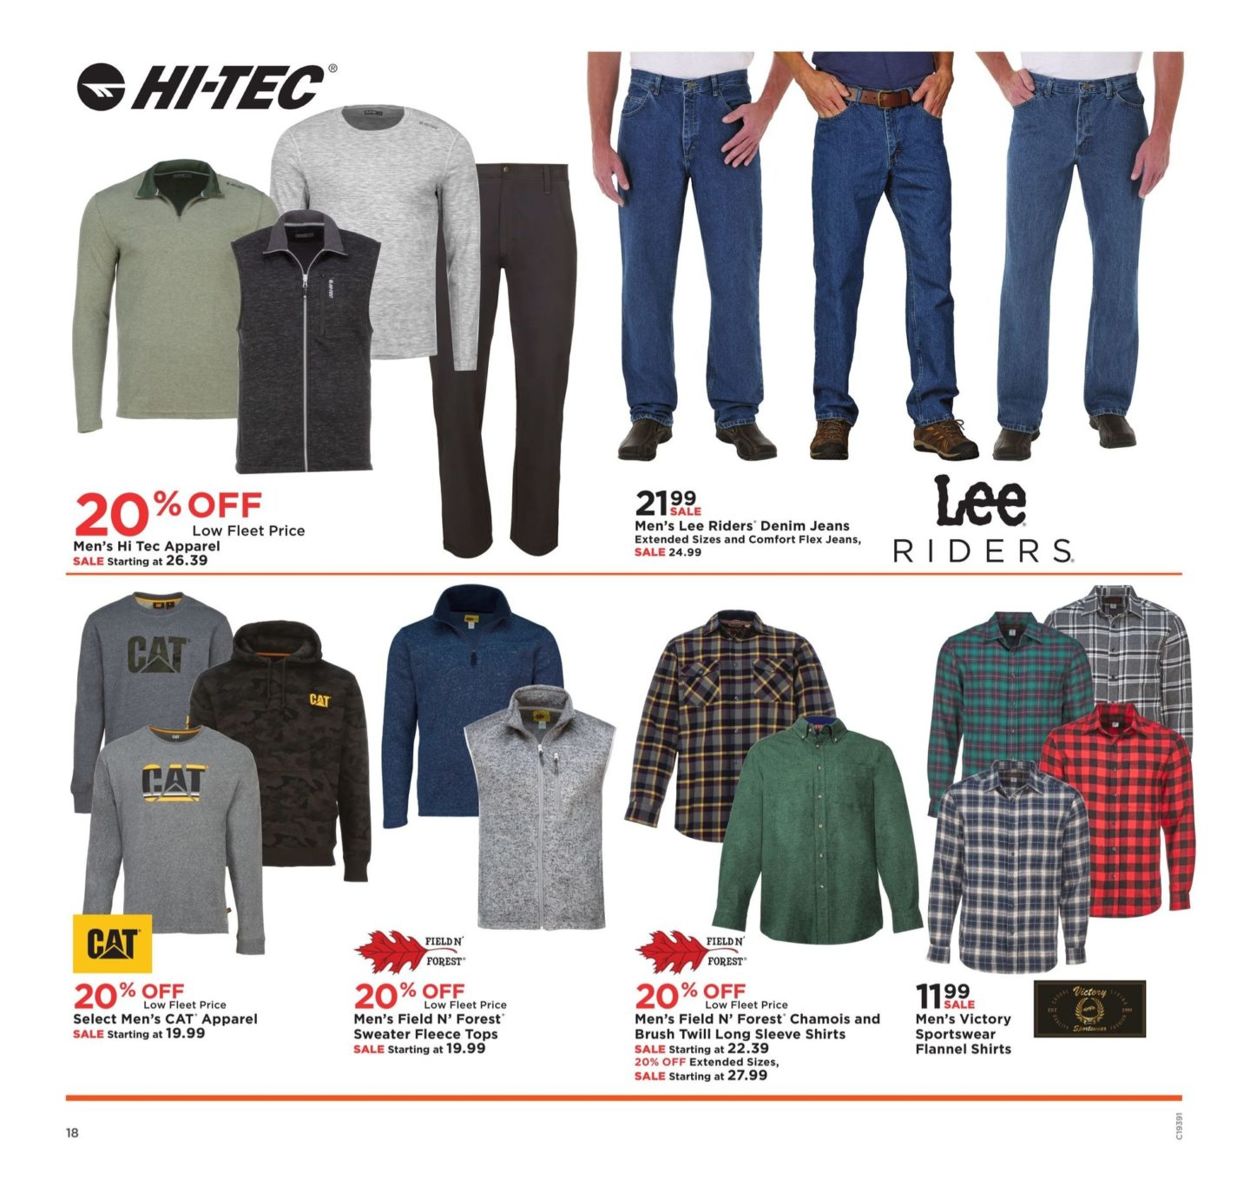 Fleet Farm Current weekly ad 09/20 - 09/28/2019 [18] - frequent-ads.com